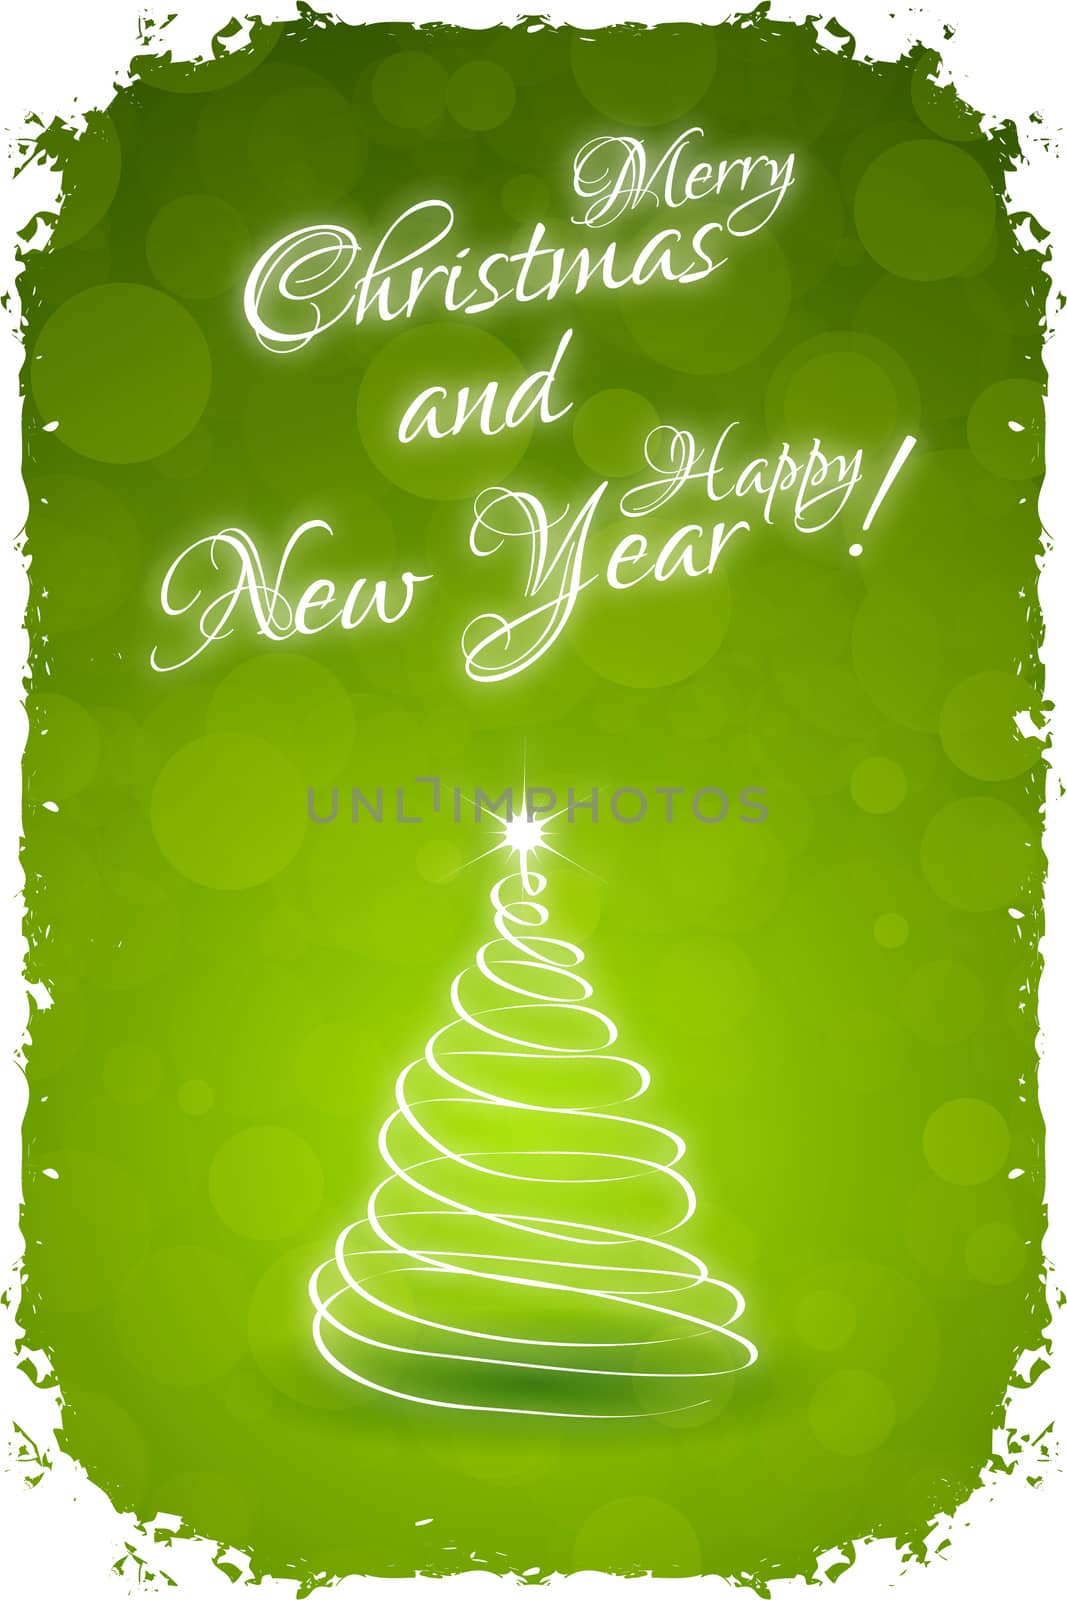 Grungy Happy New Year Card with Christmas Tree